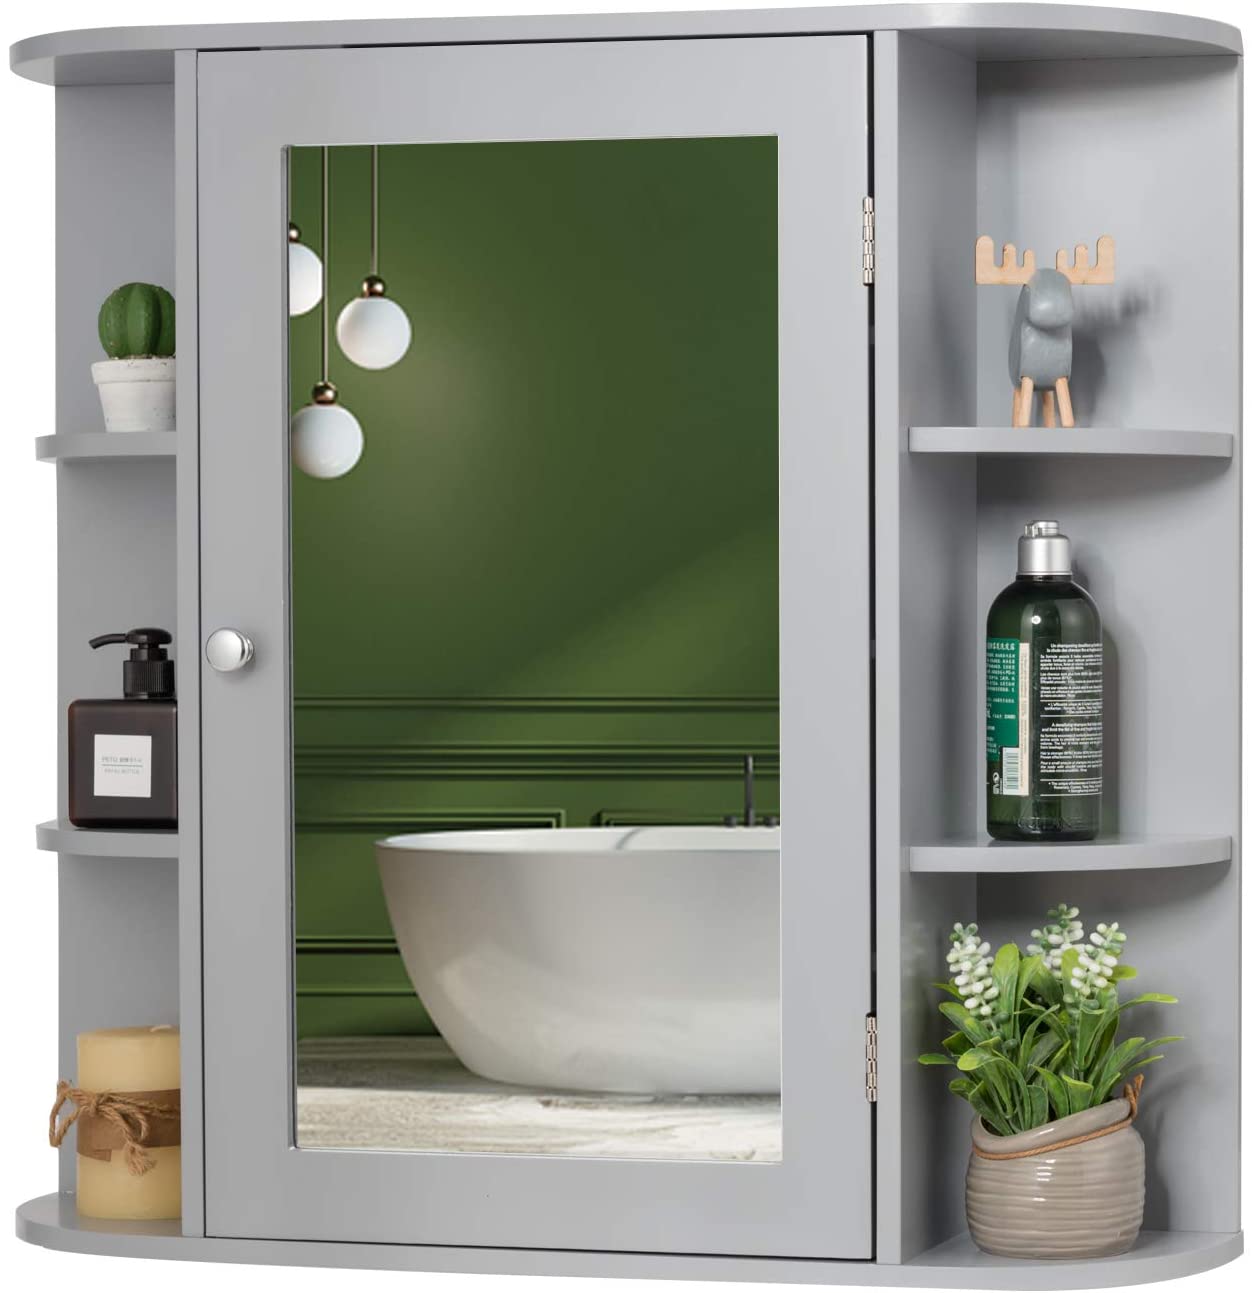 Giantex Bathroom Mirror Cabinet, Modern Wall Cabinet with Mirror, Medicine Cabinet with Mirror, Ideal for Bathroom, Dressing Room or Living Room, 26 x 6.5 x 25 inches (Grey) - image 1 of 7